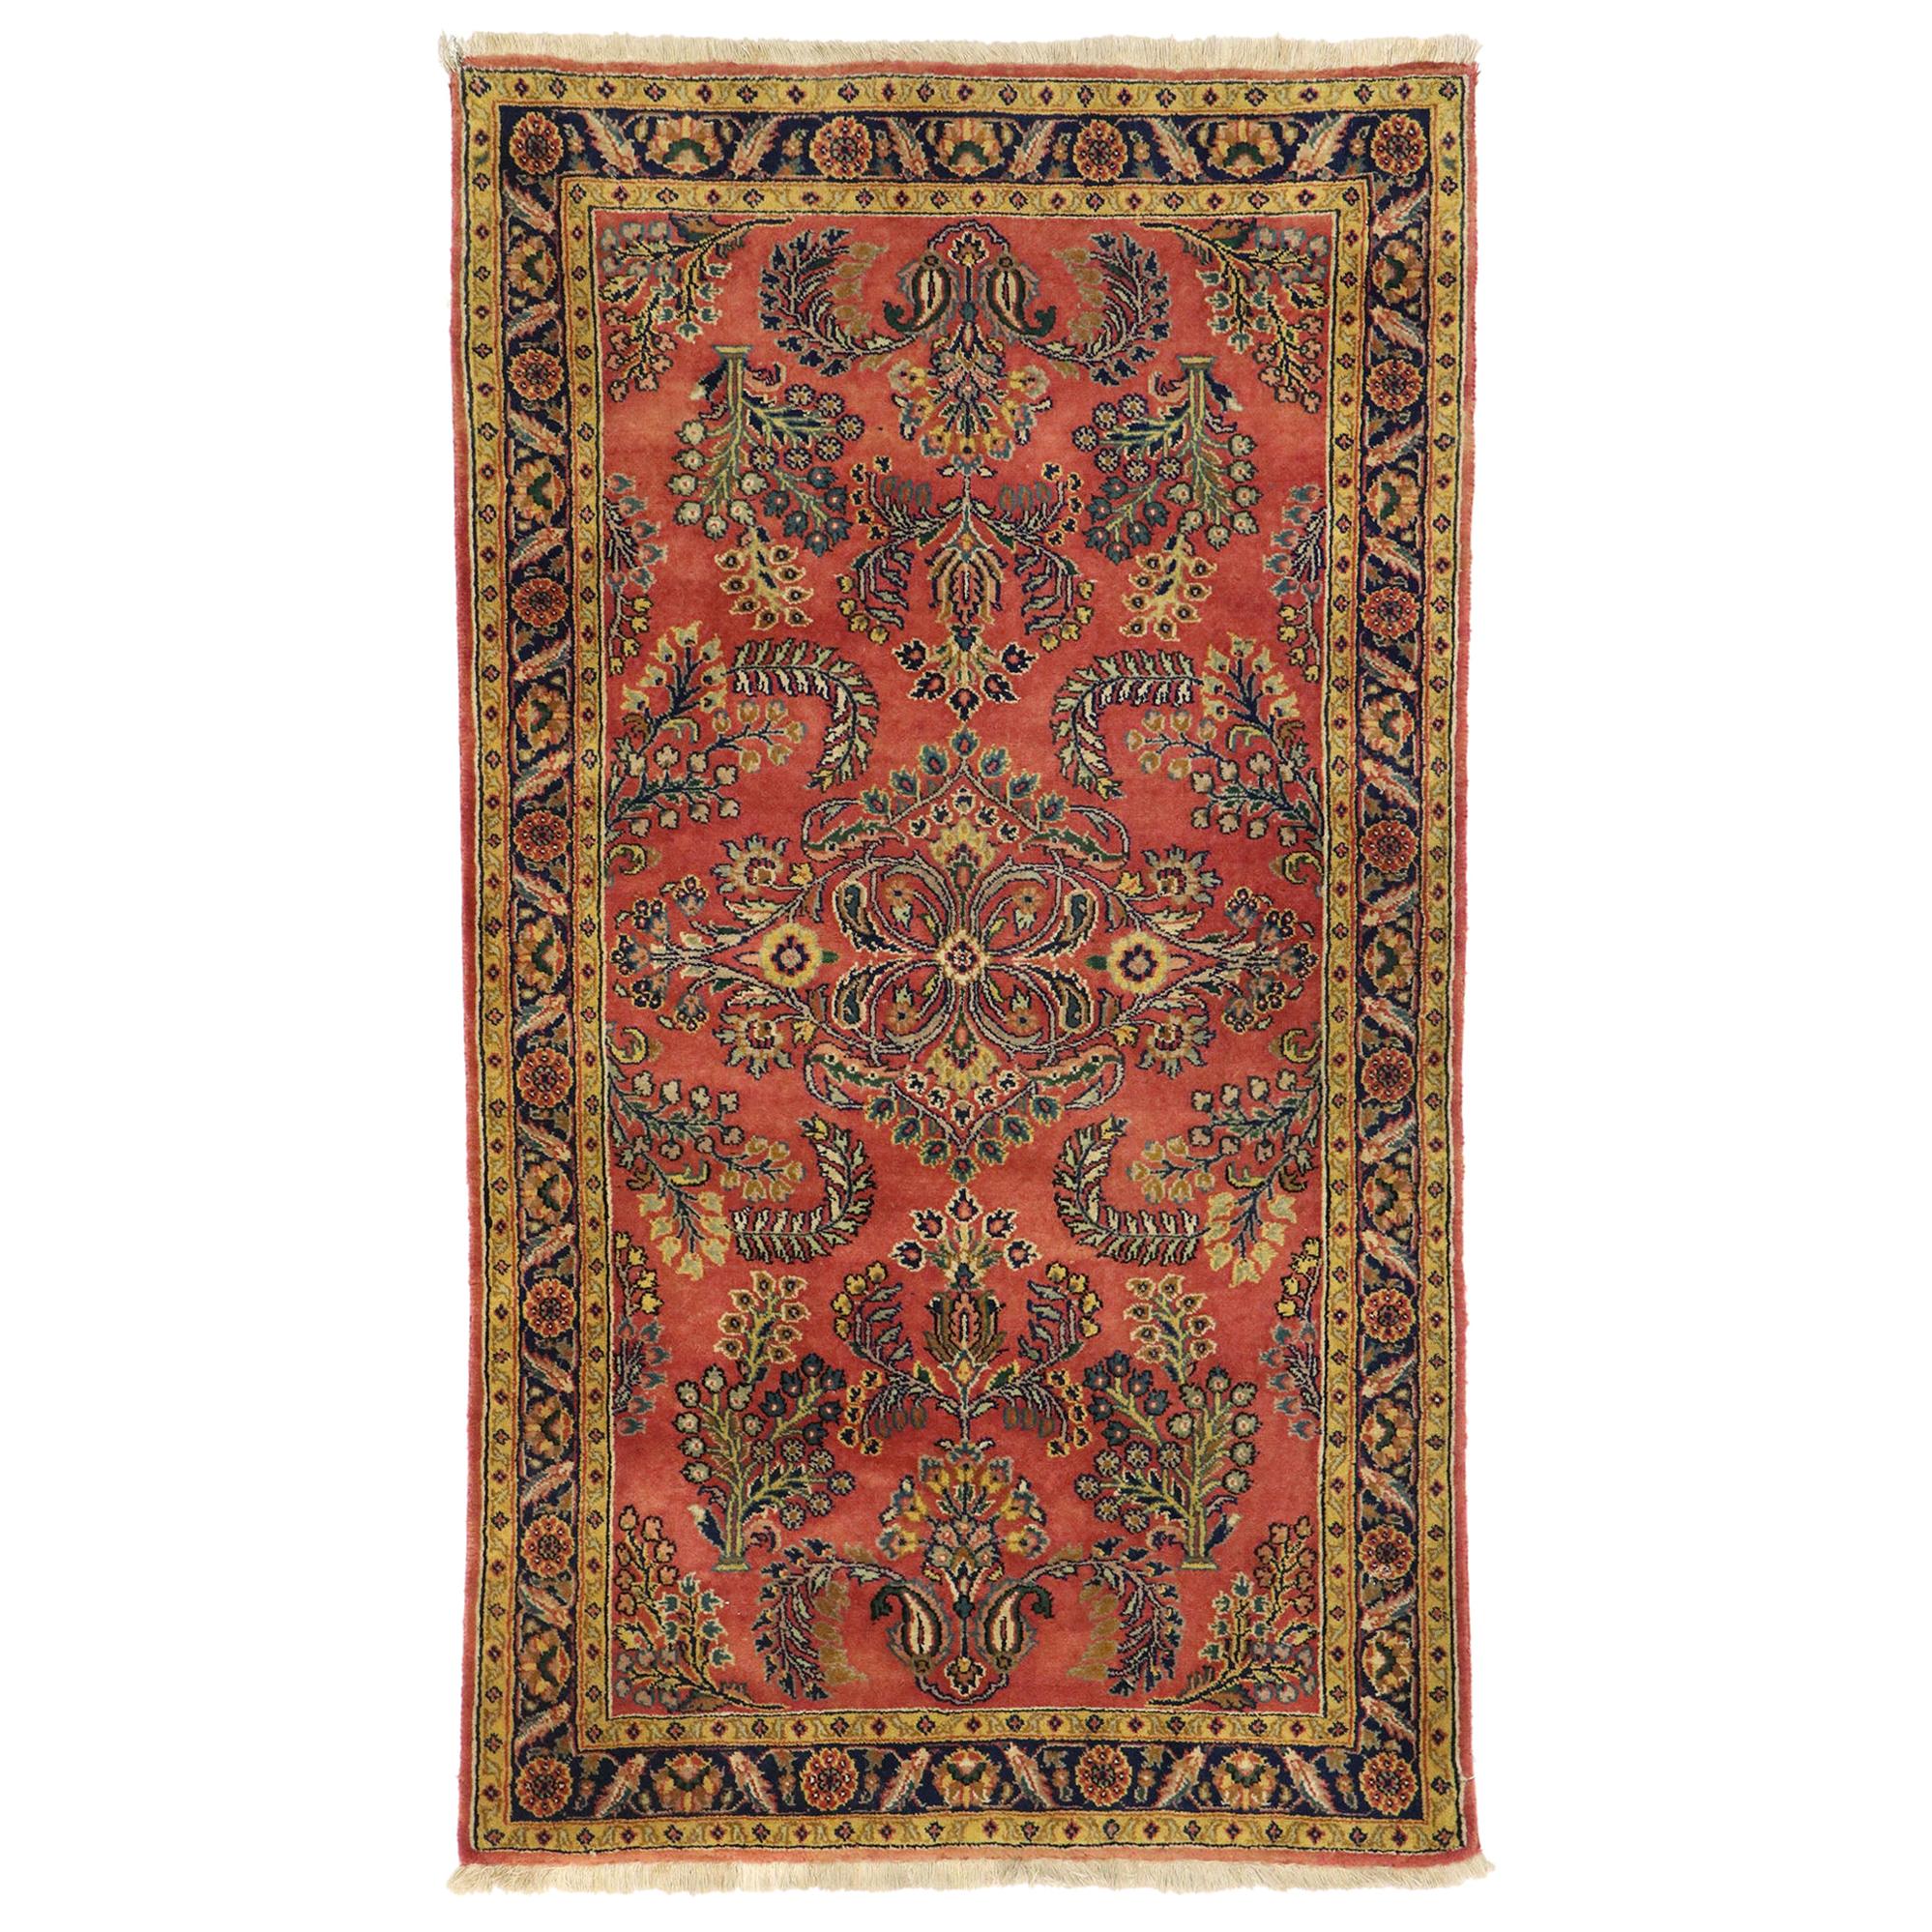 Vintage Persian Floral Sarouk Rug with Traditional English Tudor Style